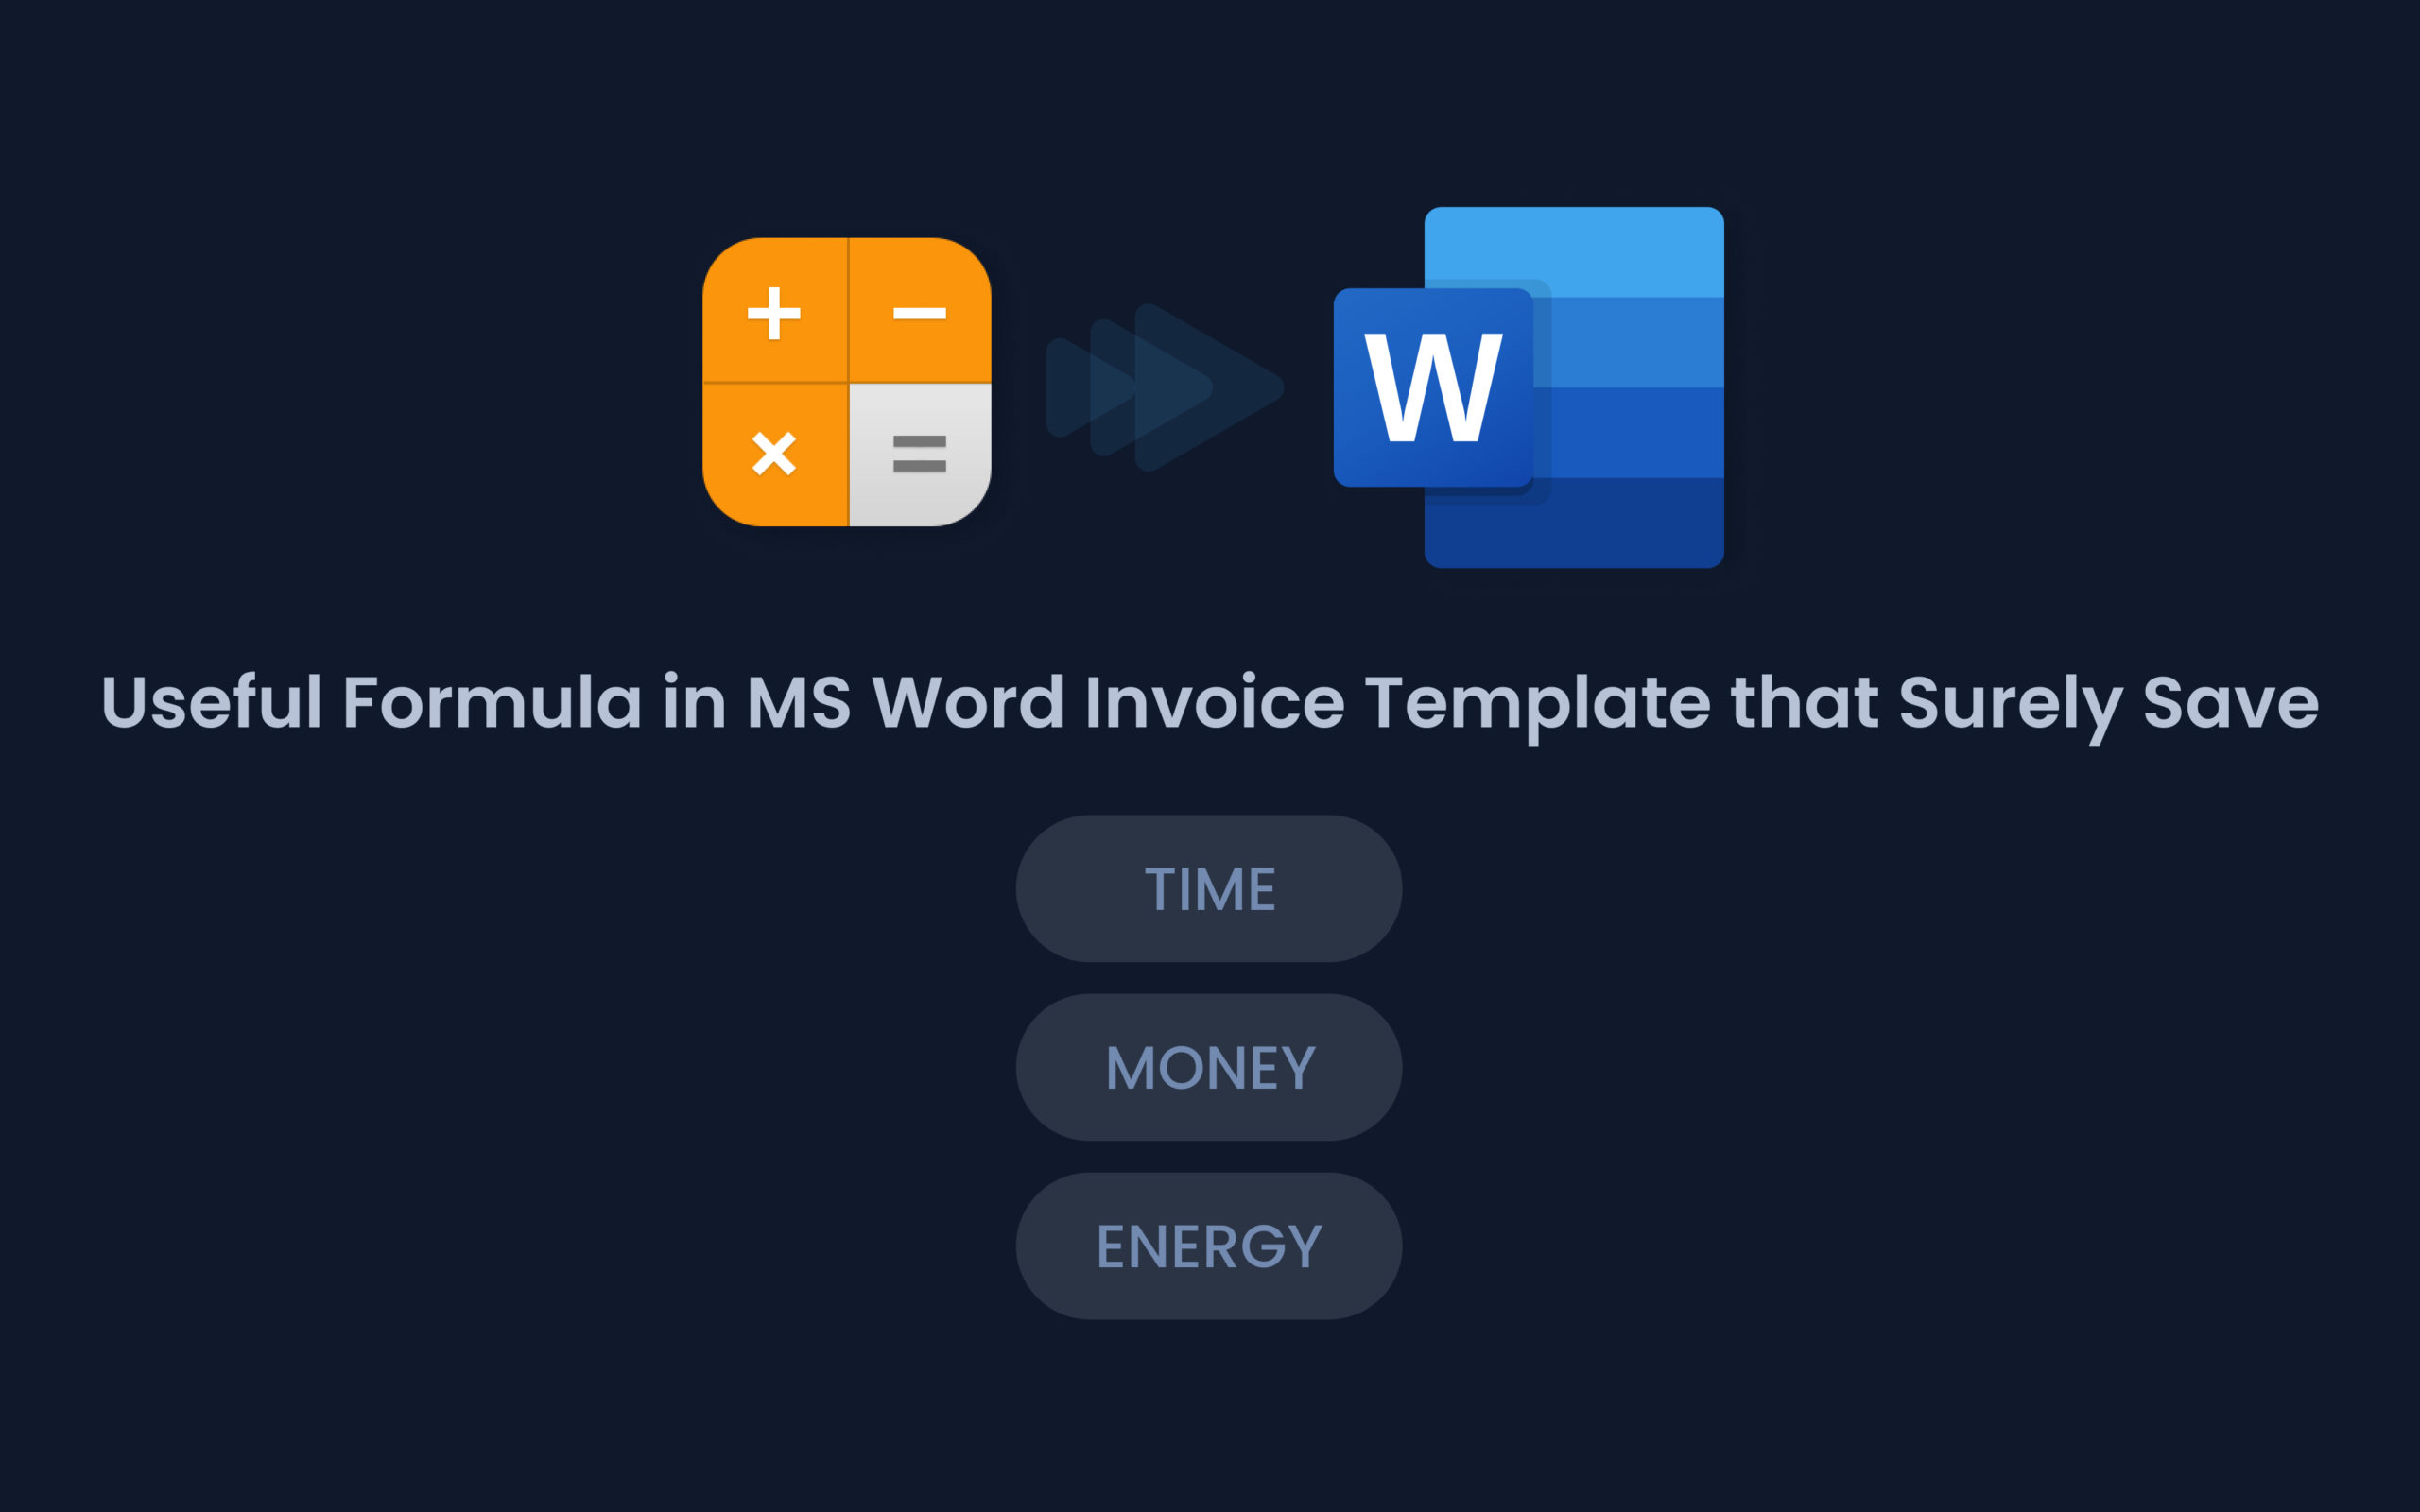 ms word template uses